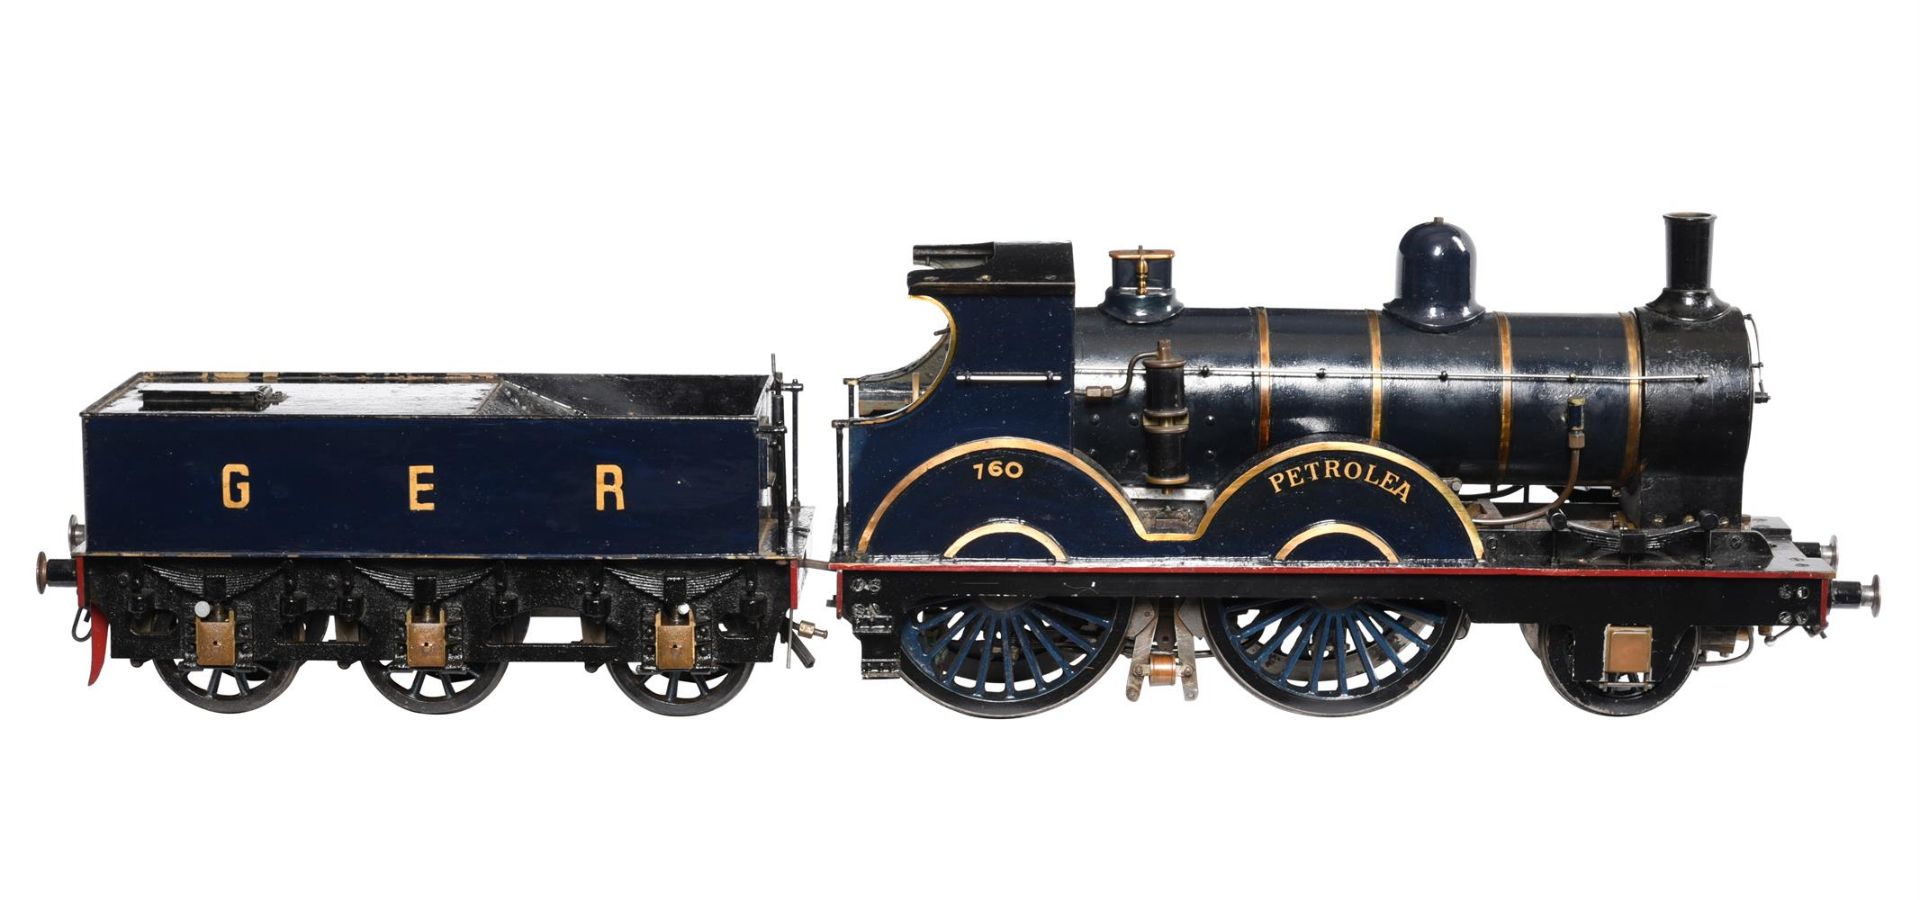 A well-engineered 3 1/2 inch gauge model of GER 2-4-0 Class T19 locomotive No 760 'Petrolea' - Image 2 of 4